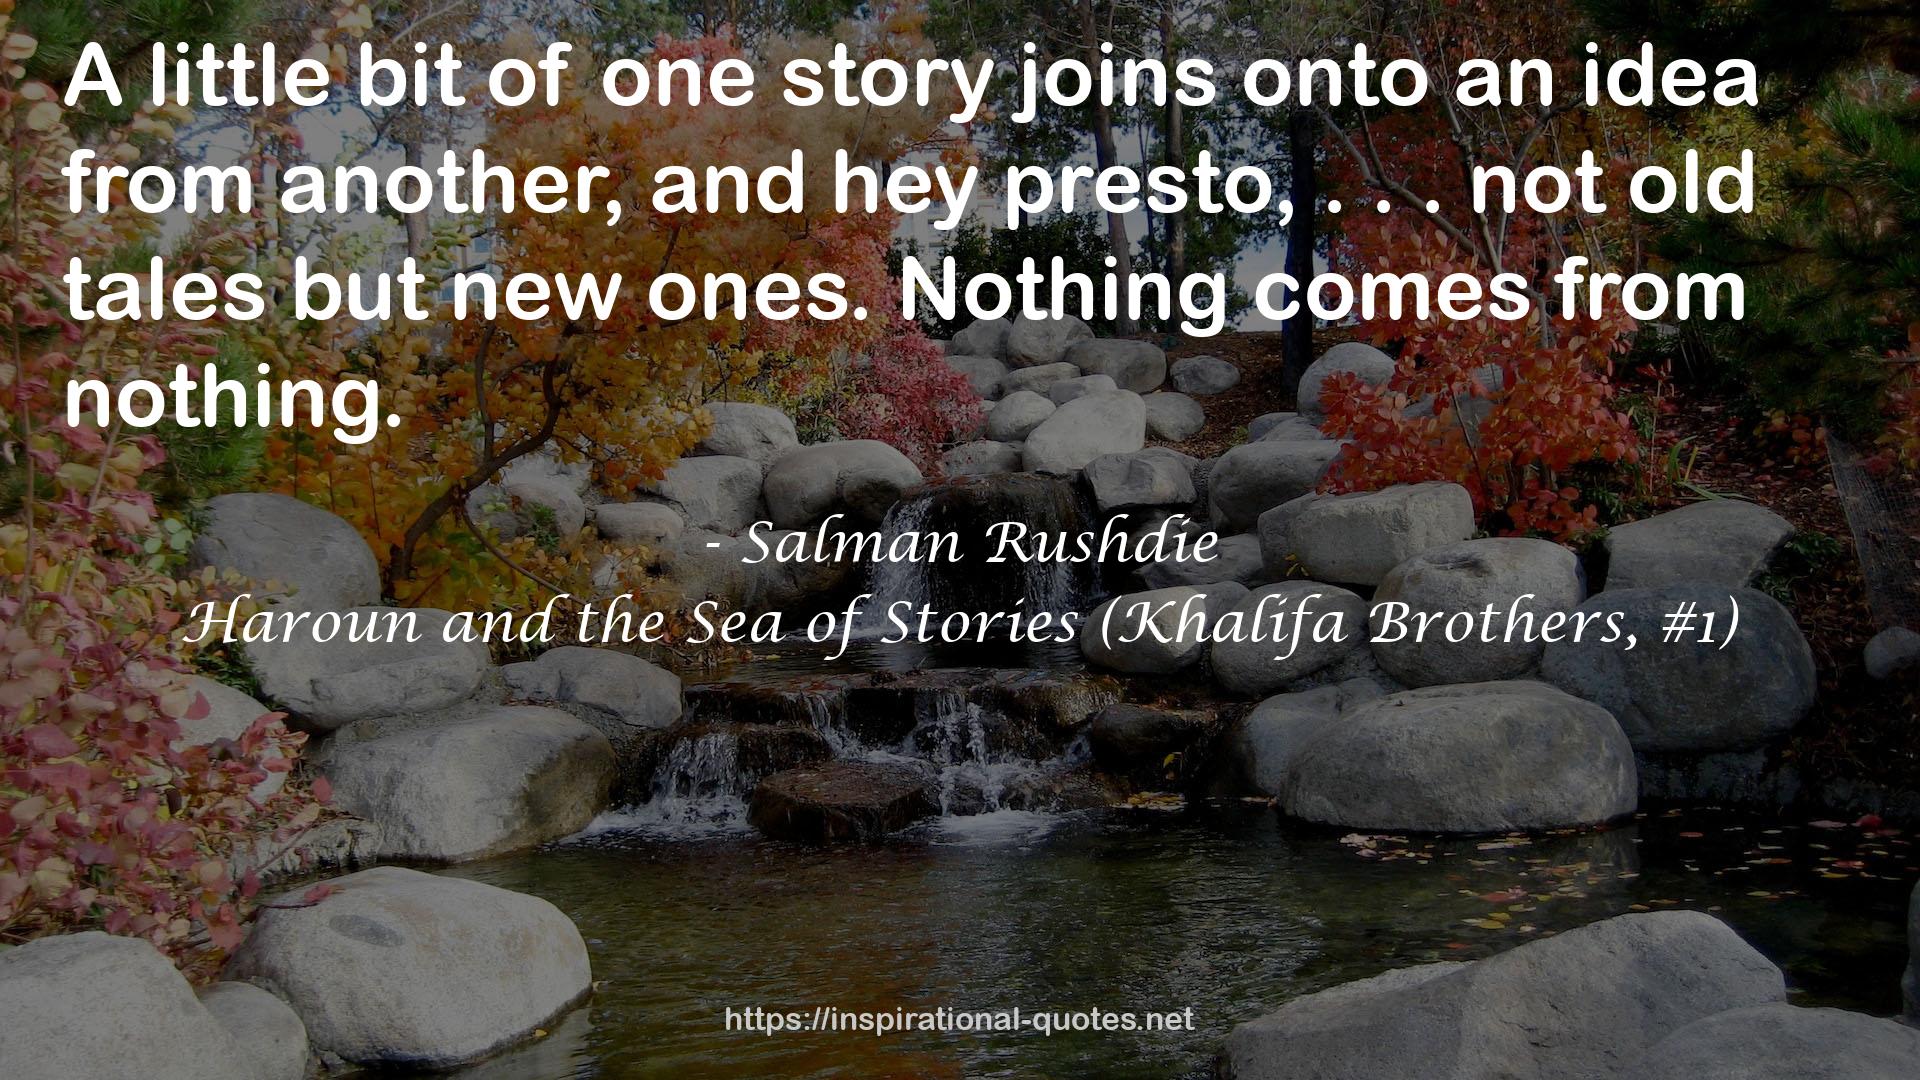 Haroun and the Sea of Stories (Khalifa Brothers, #1) QUOTES